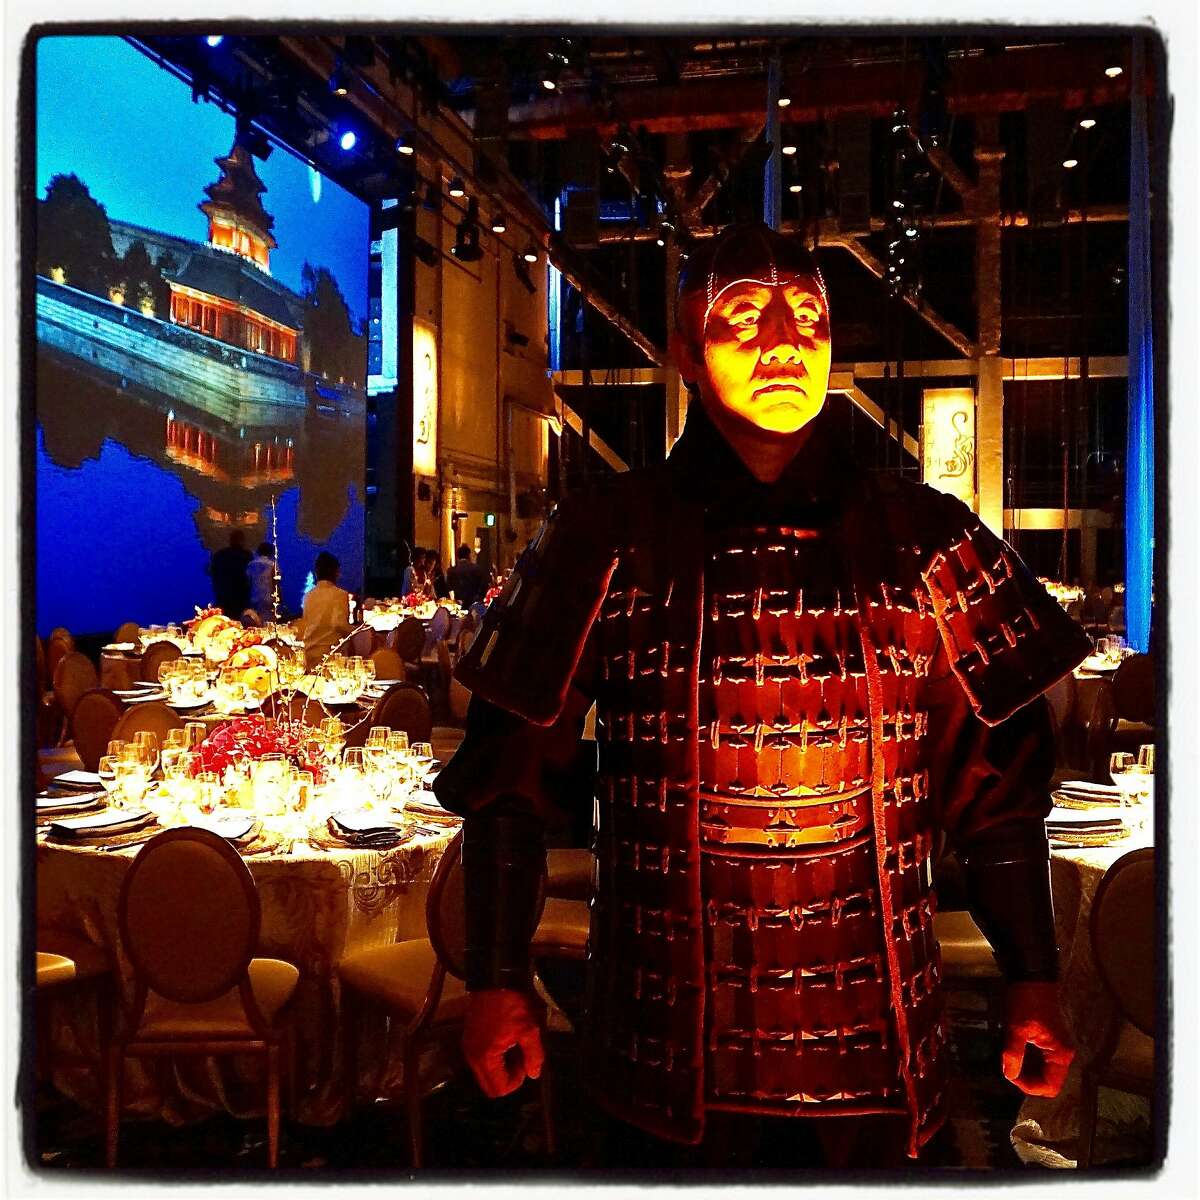 An actor poses as a Terra Cotta Warrior inside Zellerbach Hall for the Year of the Monkey celebration at the SF Symphony Chinese New Year Concert & Imperial Dinner at Davies Hall. Feb 2016.